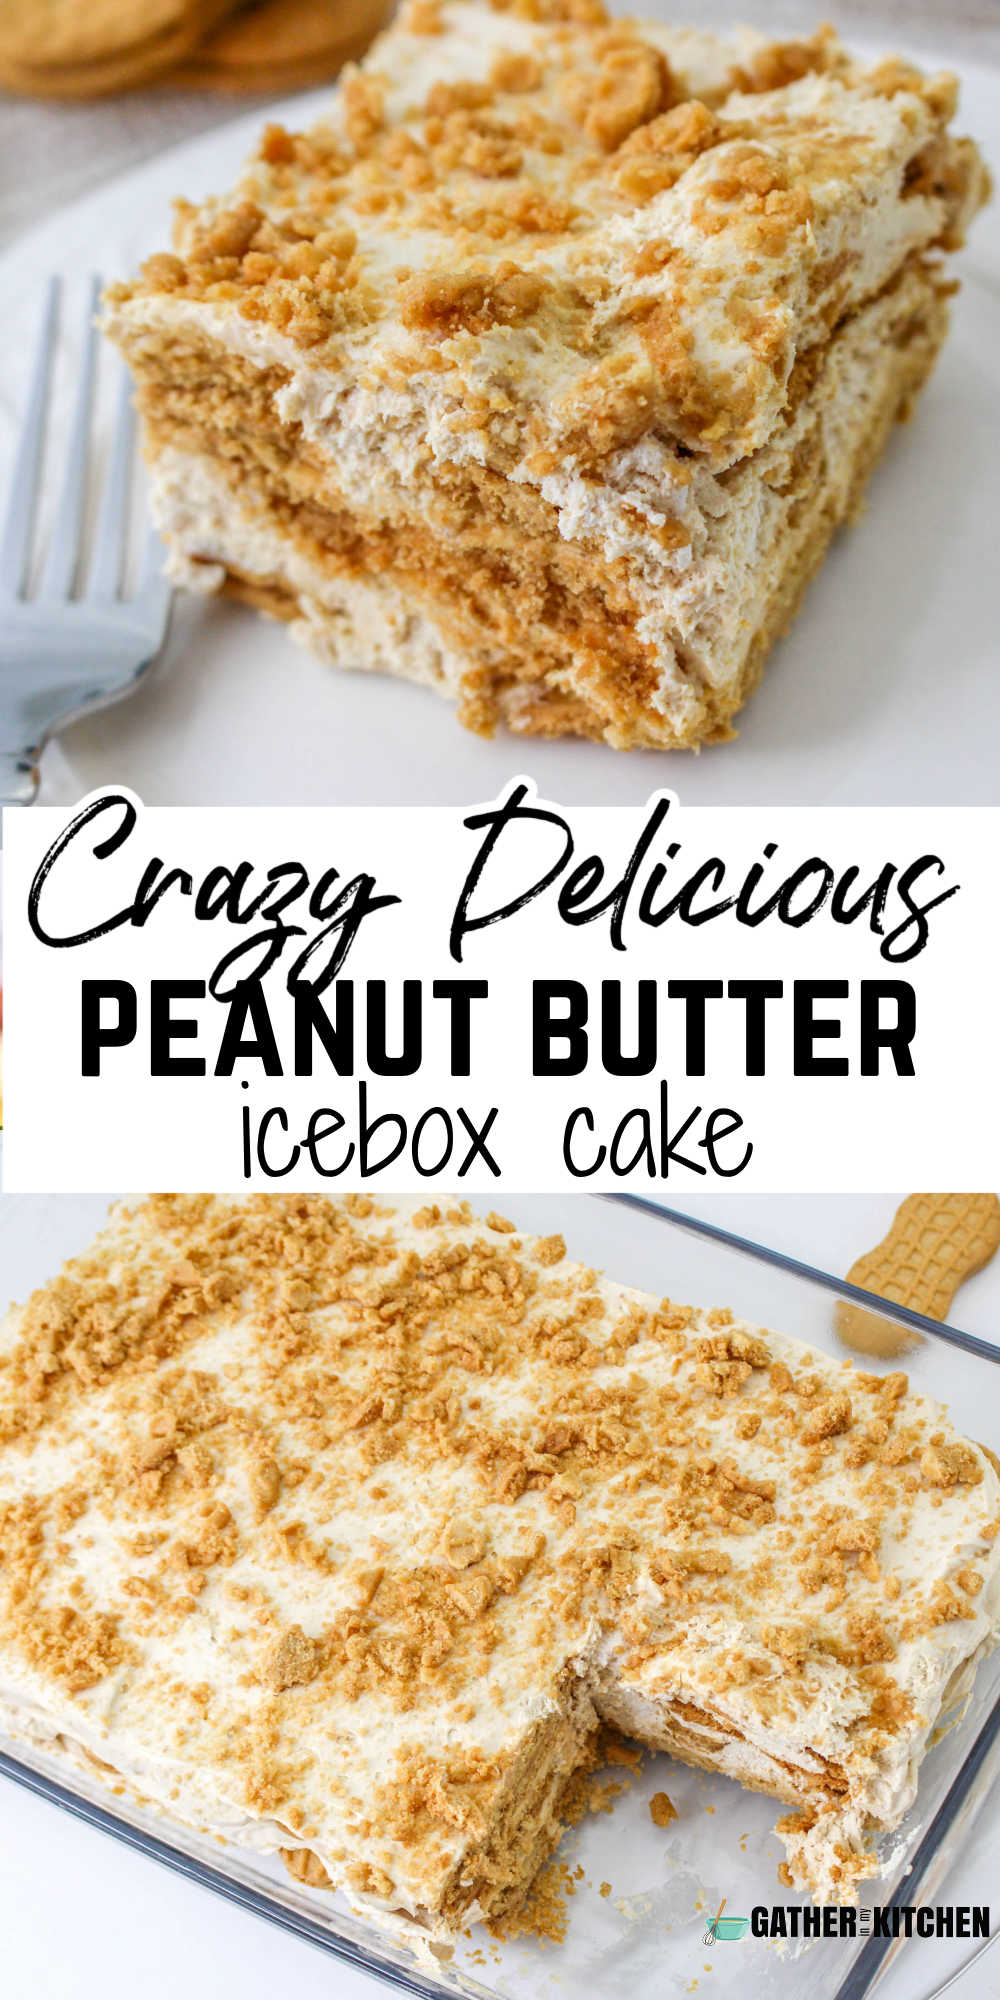 Pin image: top has a slice of peanut butter ice box cake, middle says "Crazy delicious peanut butter icebox cake" and the bottom has the cake in a casserole dish with a piece taken out.